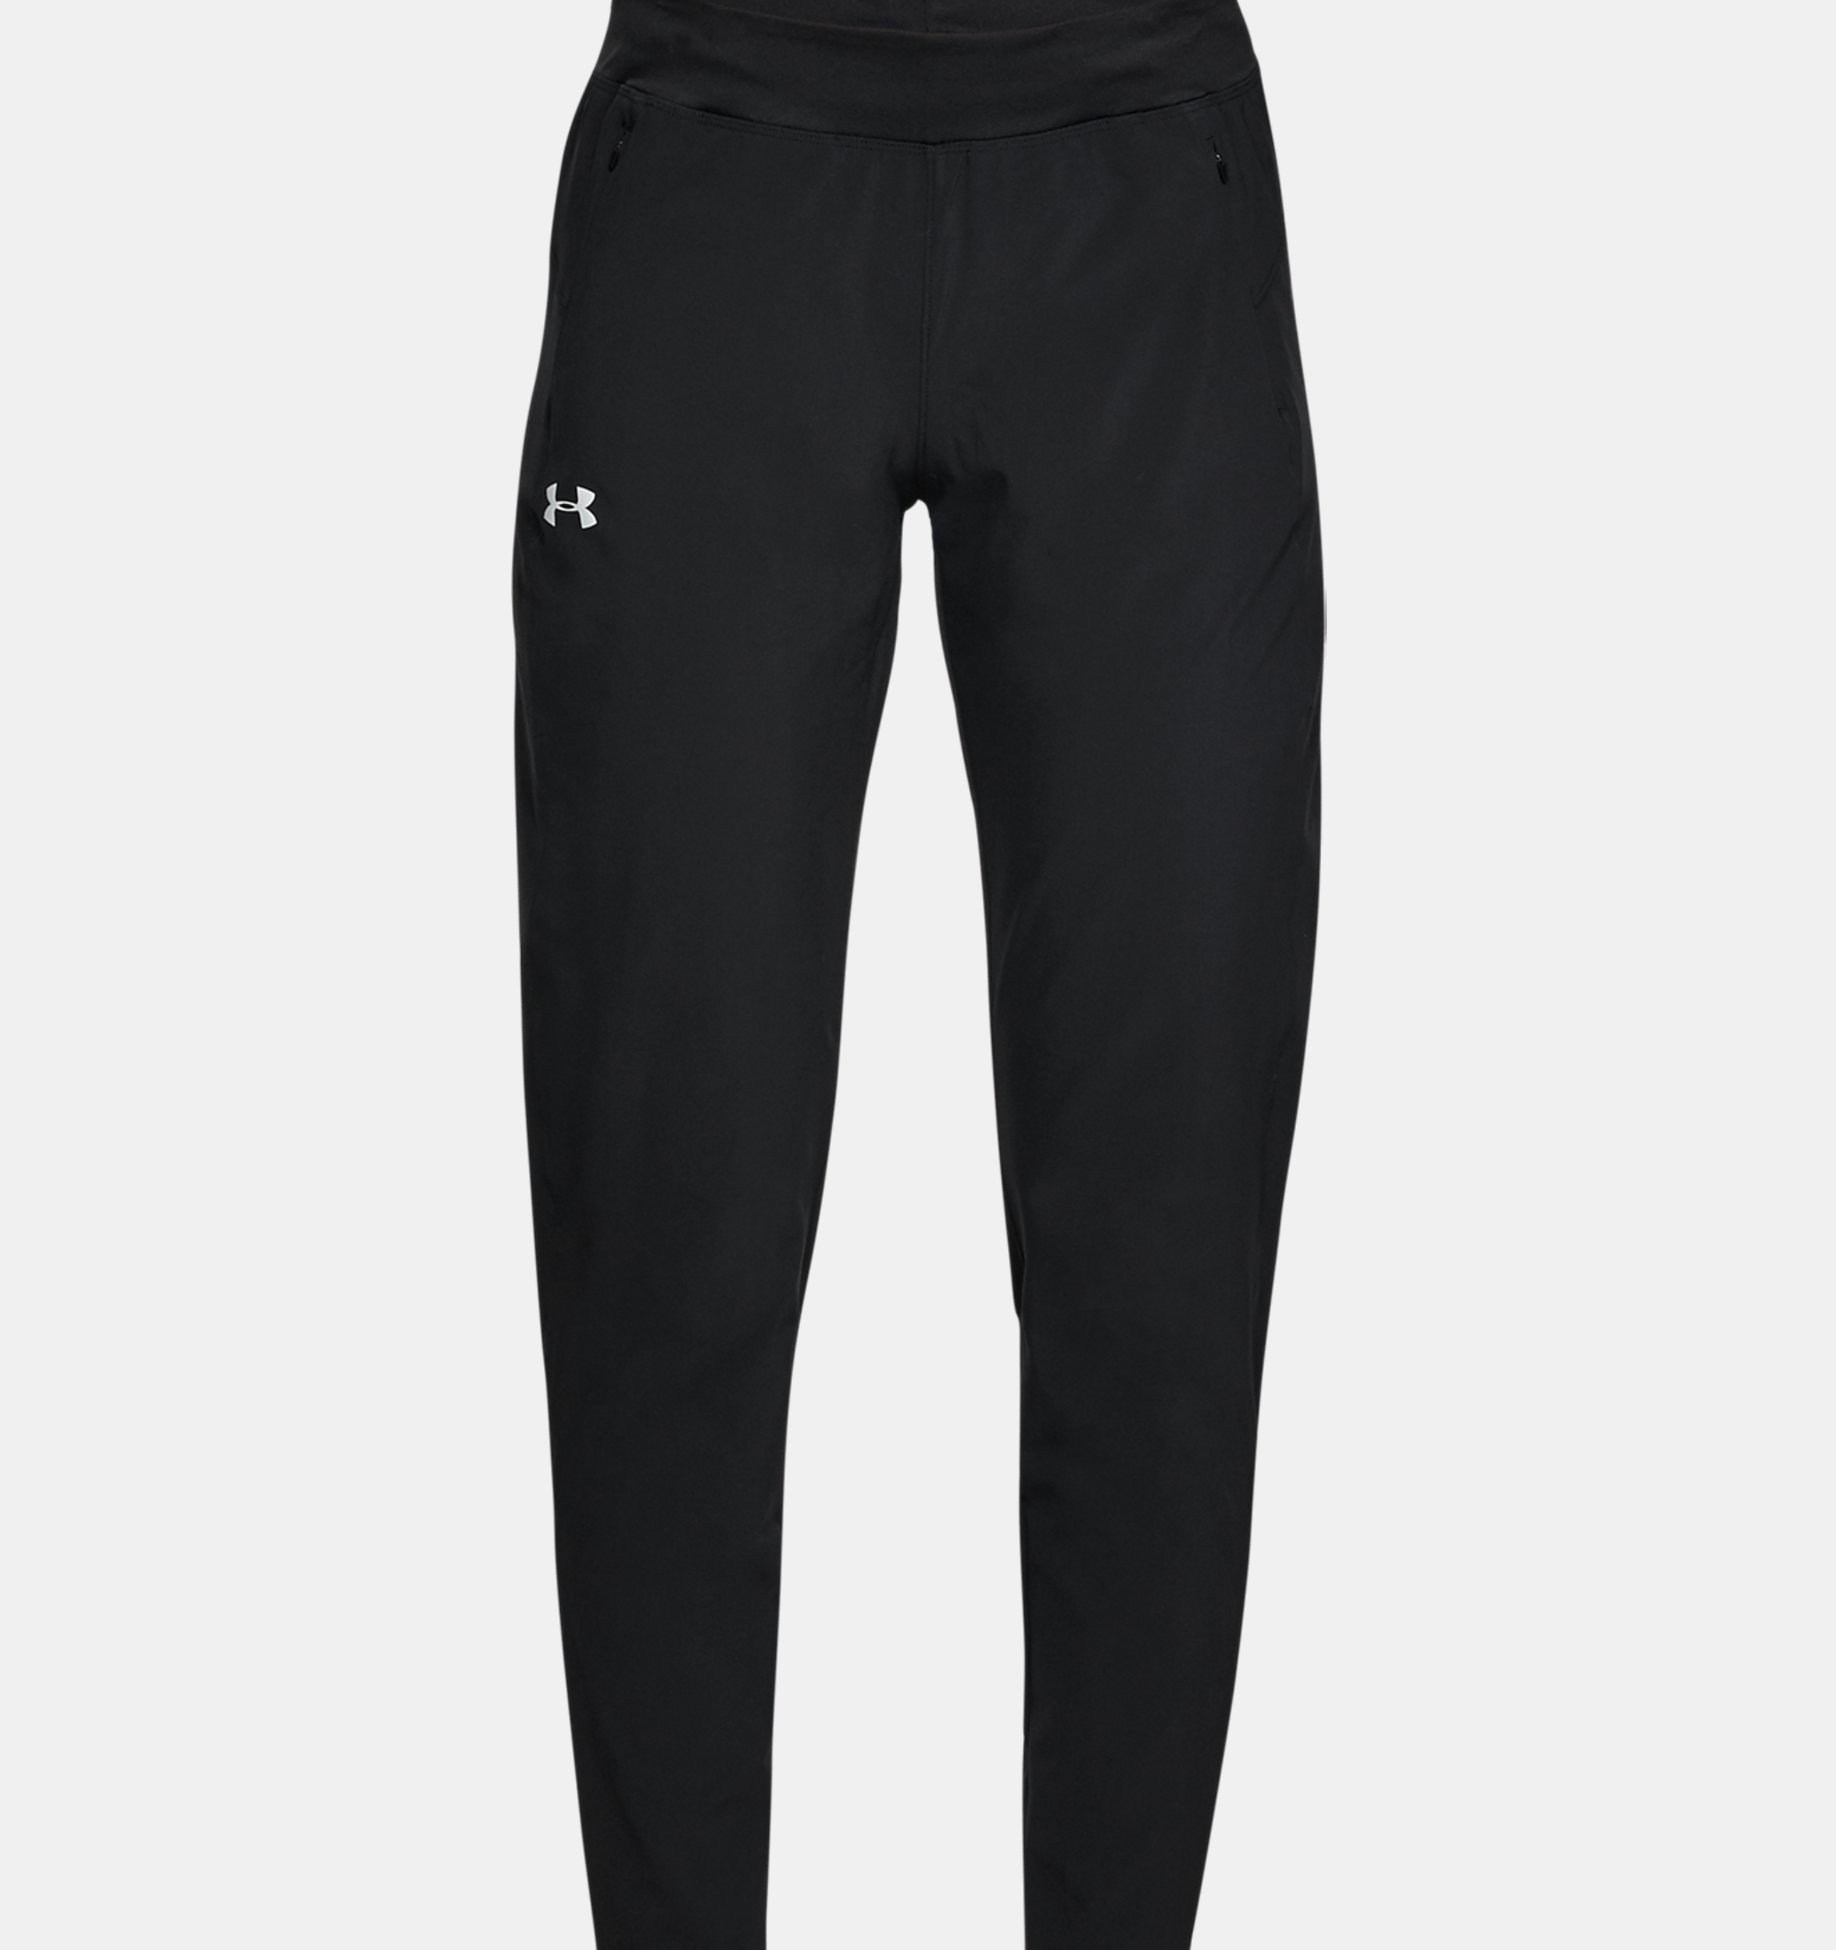 Under Armour Womens Storm Launch Linked Up Pant Pants 